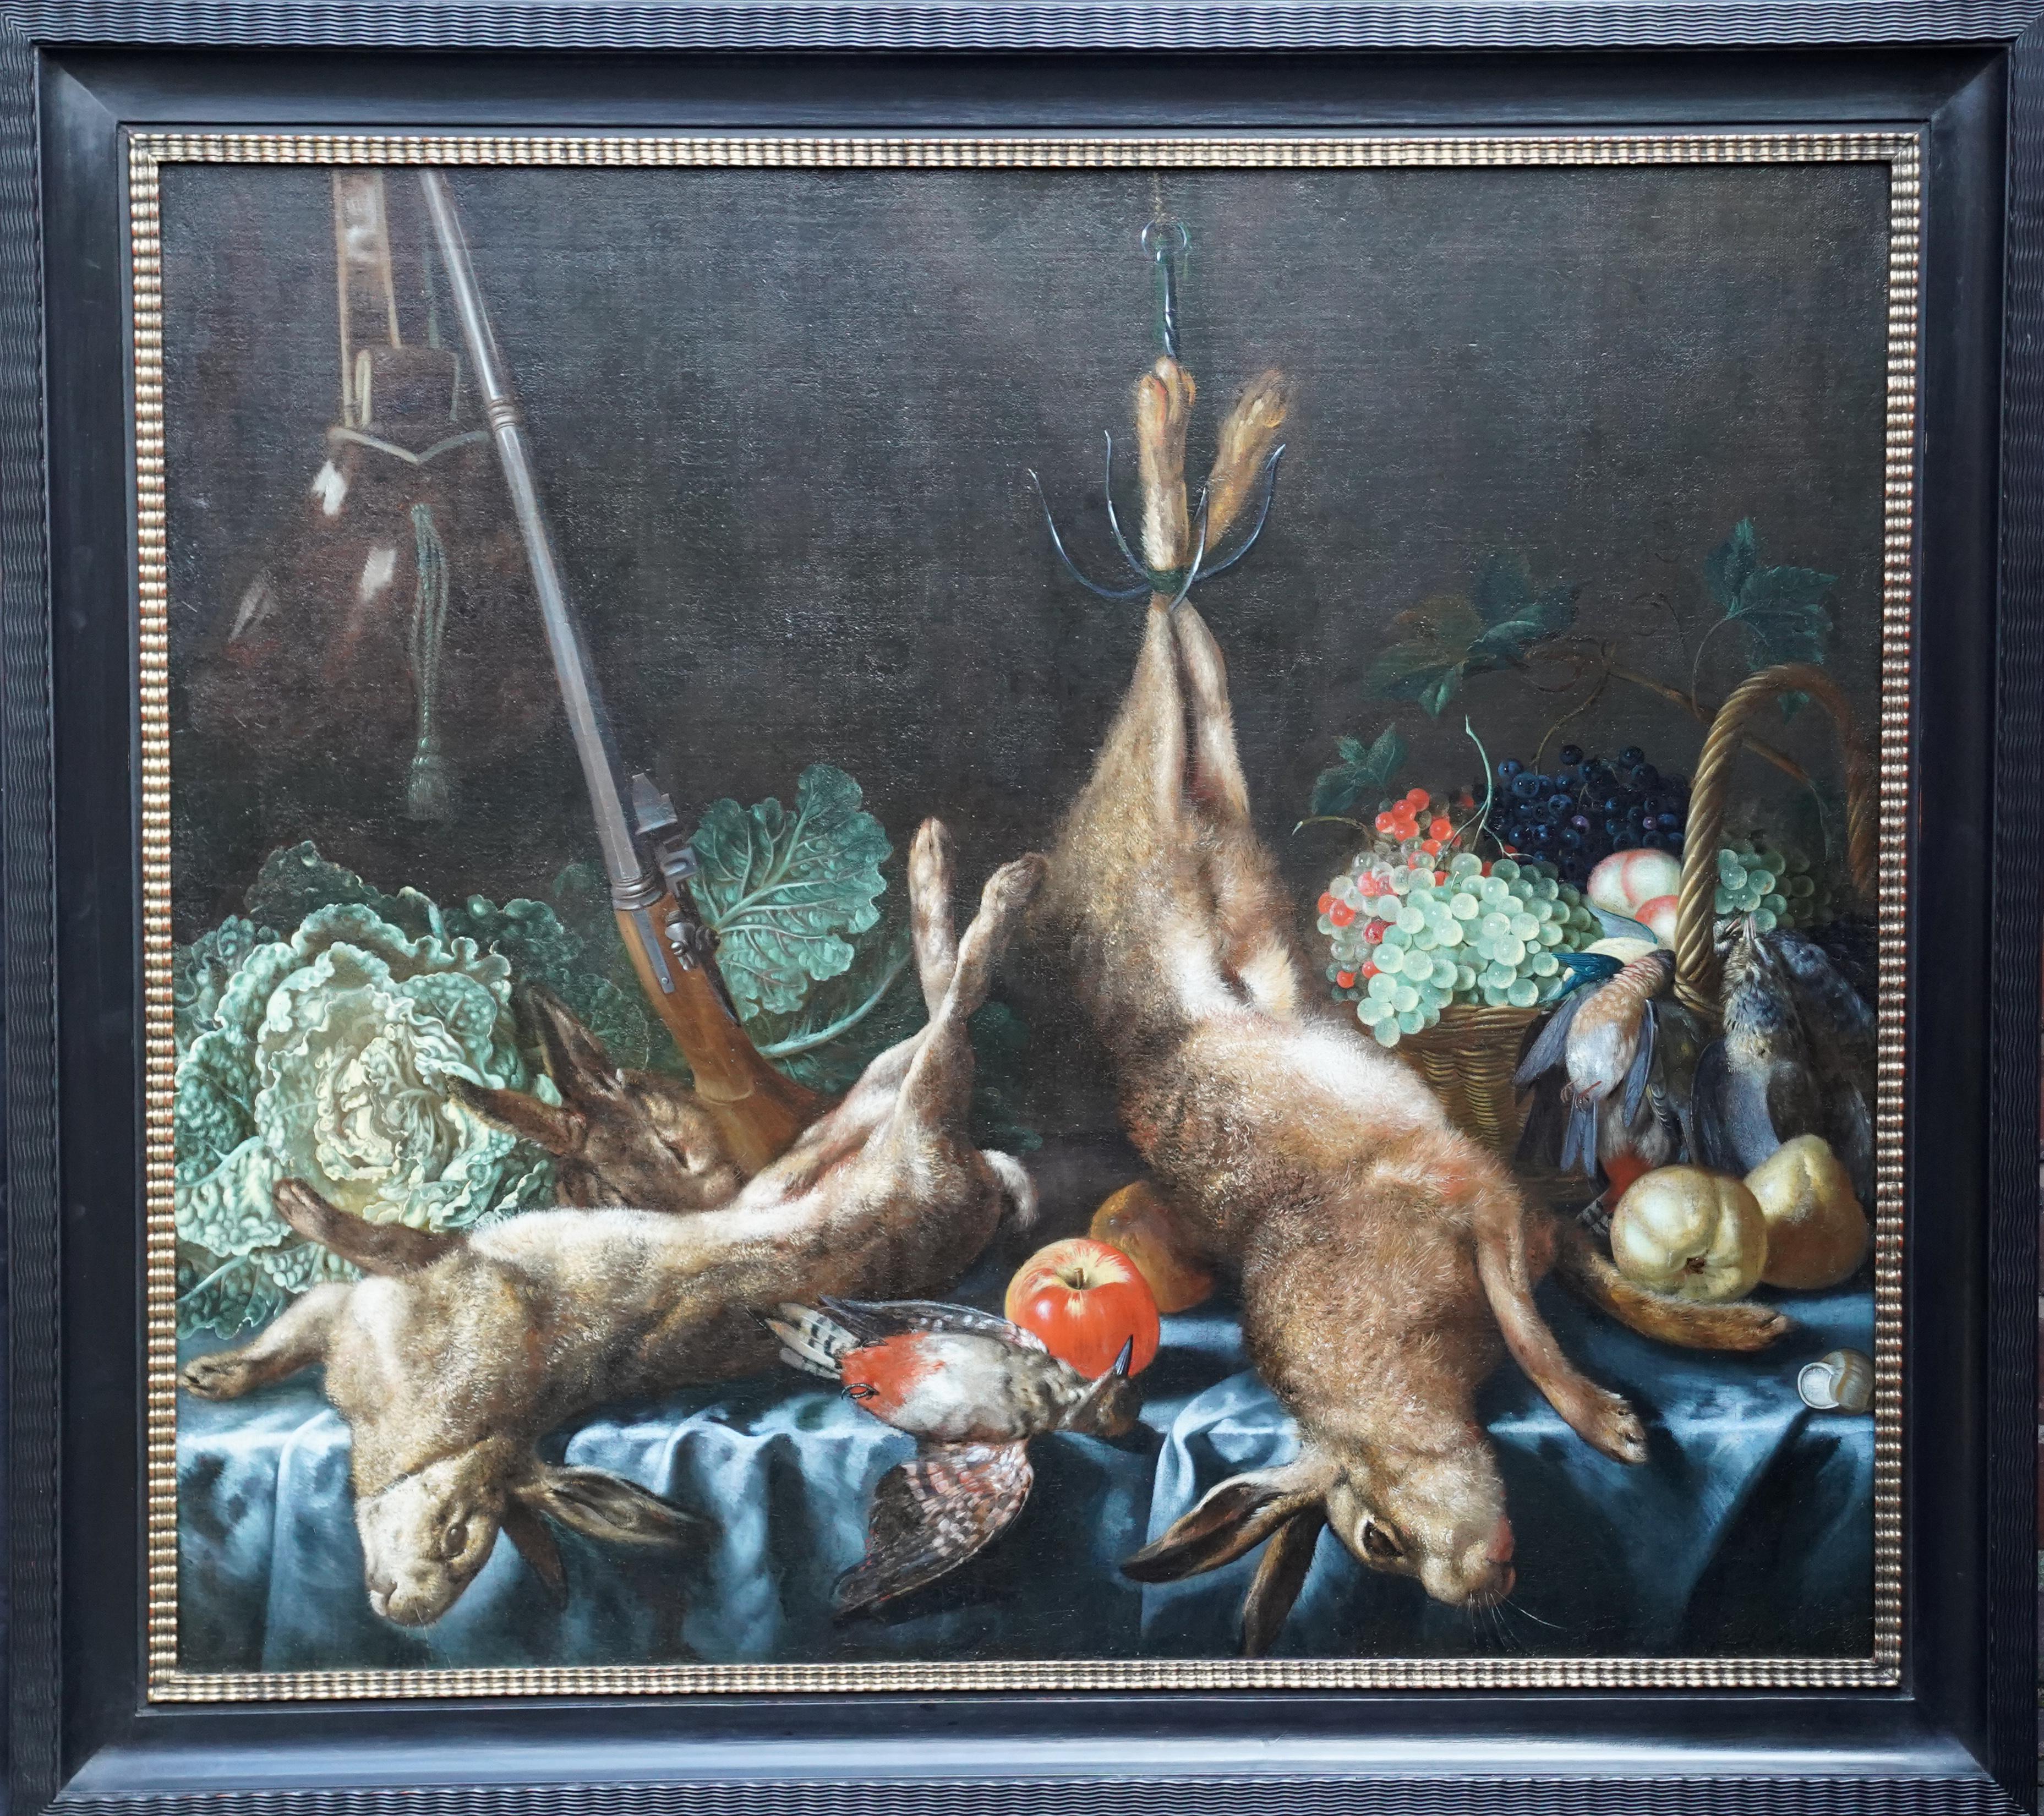 Still Life with Game, Fruit and Veg - Flemish 17thC Old Master art oil painting